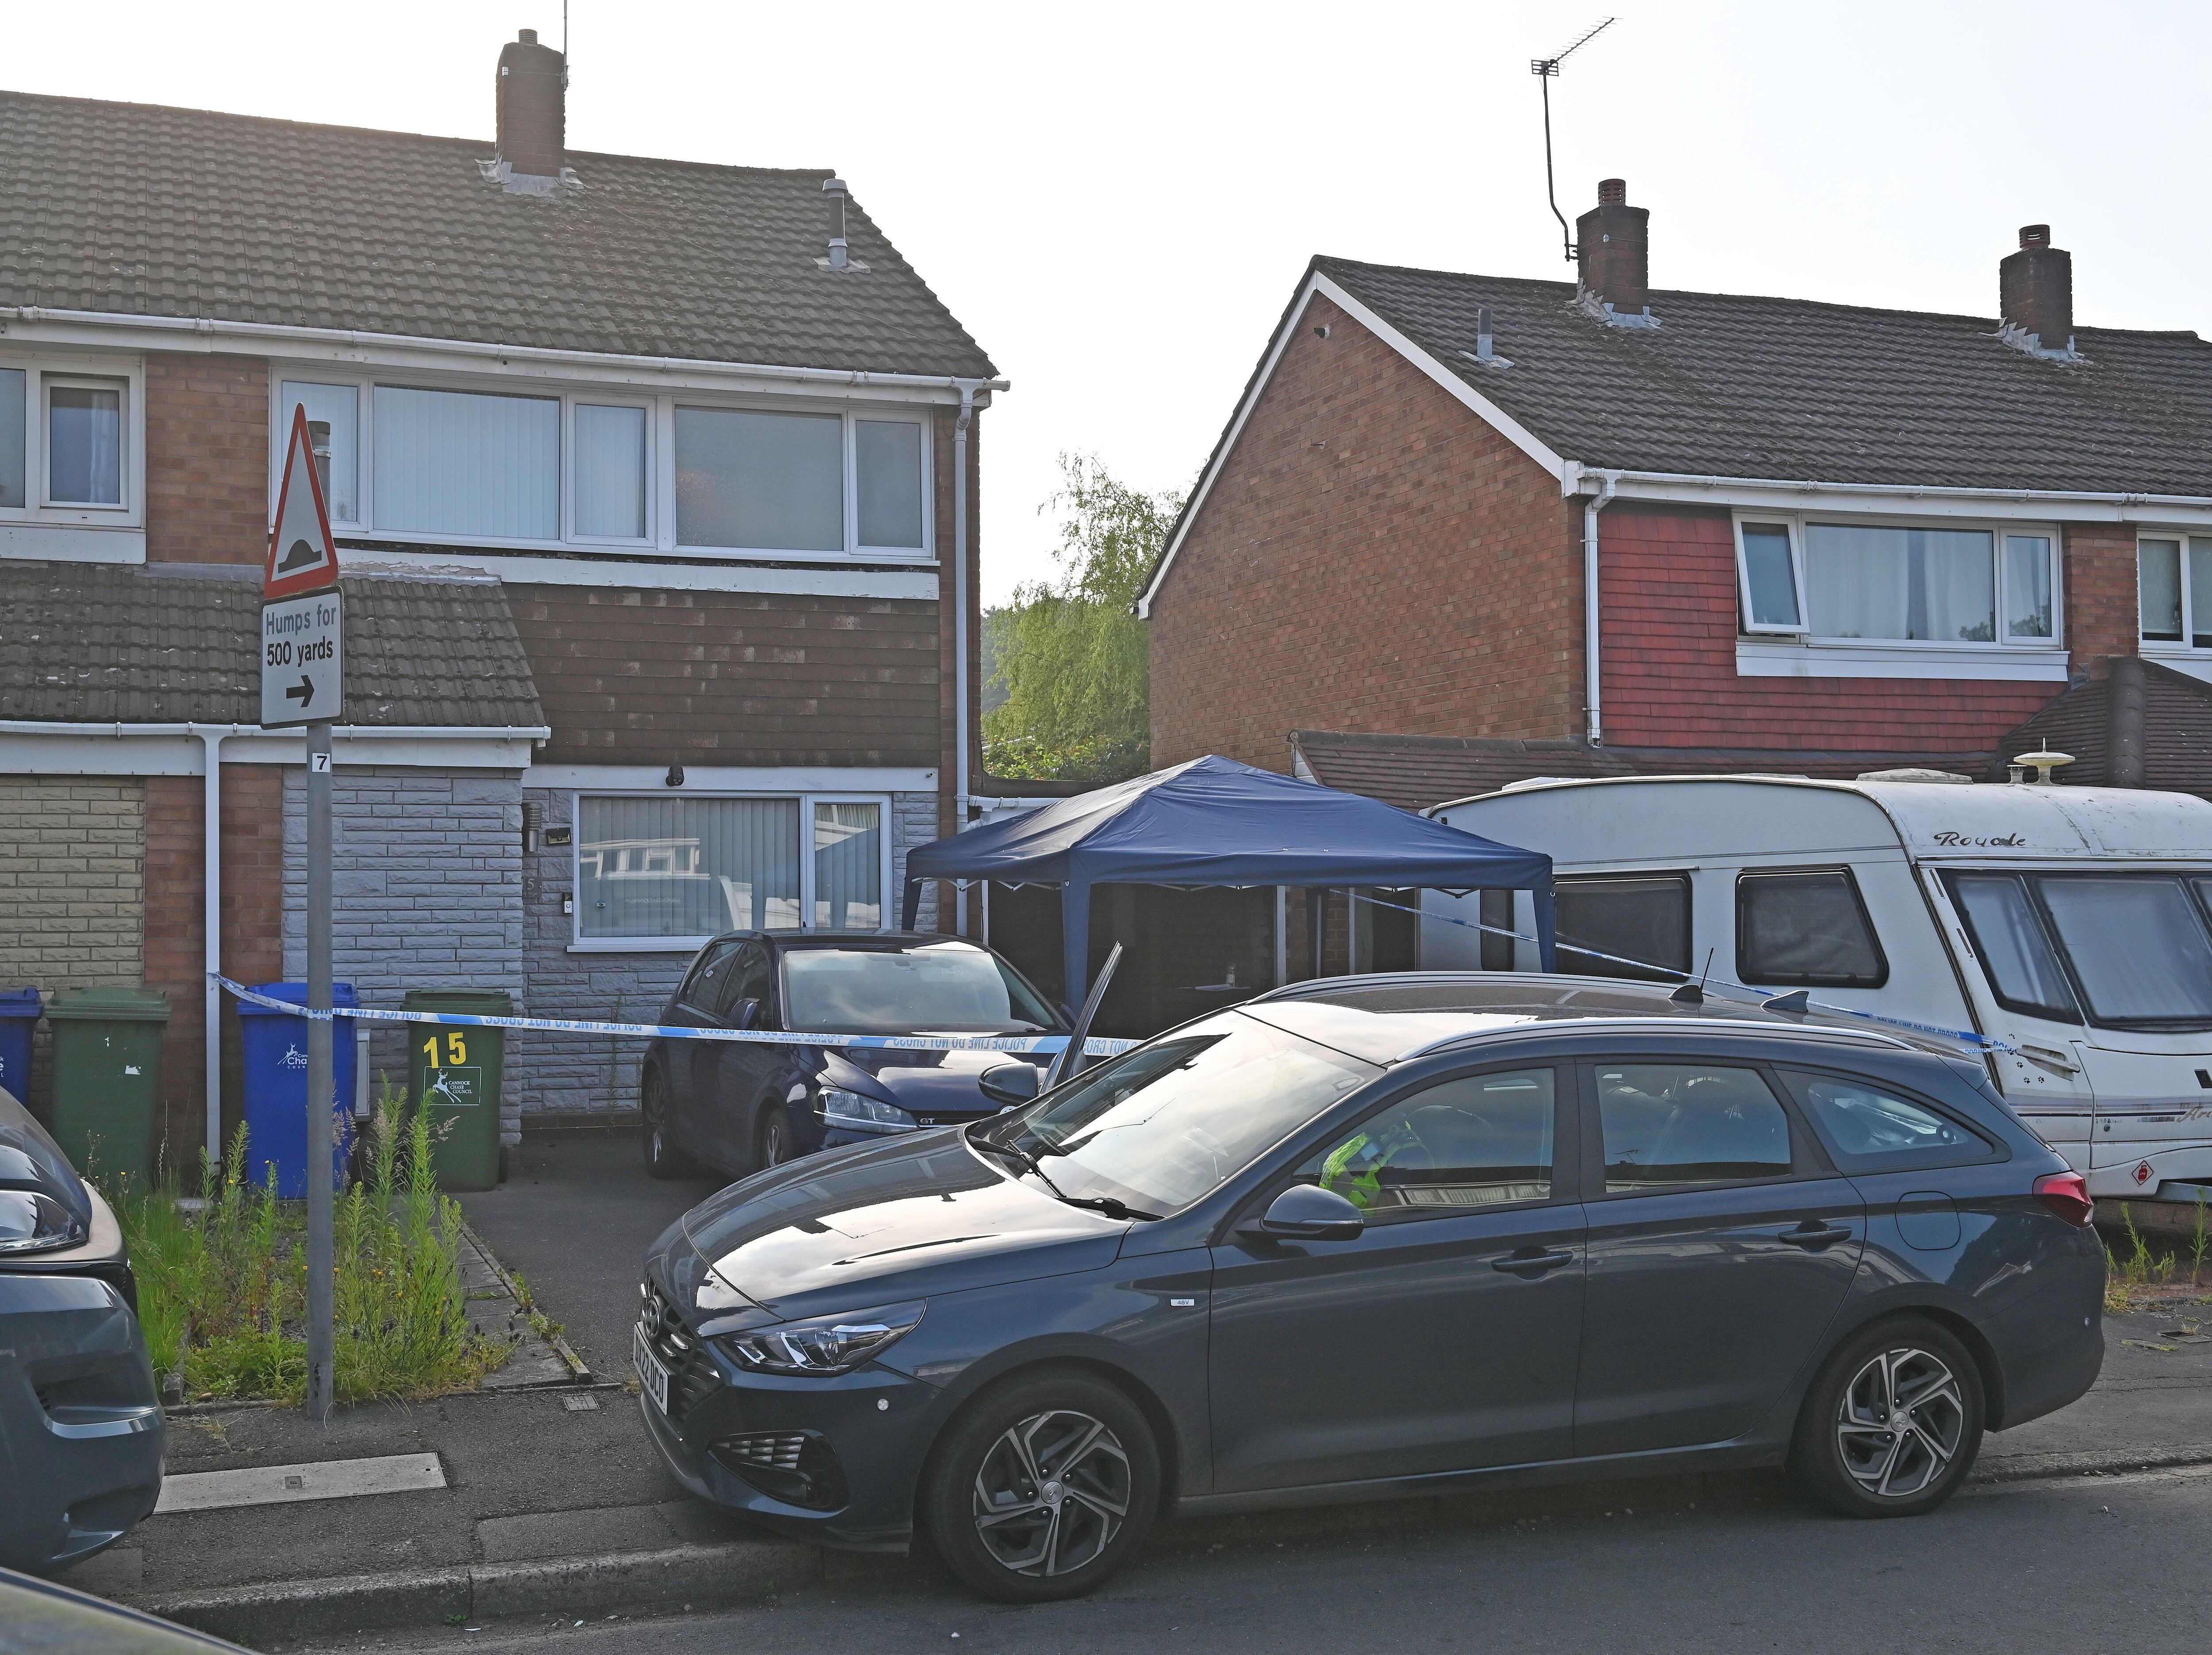 Police 'not looking for anyone else' after Hednesford deaths prompt murder probe